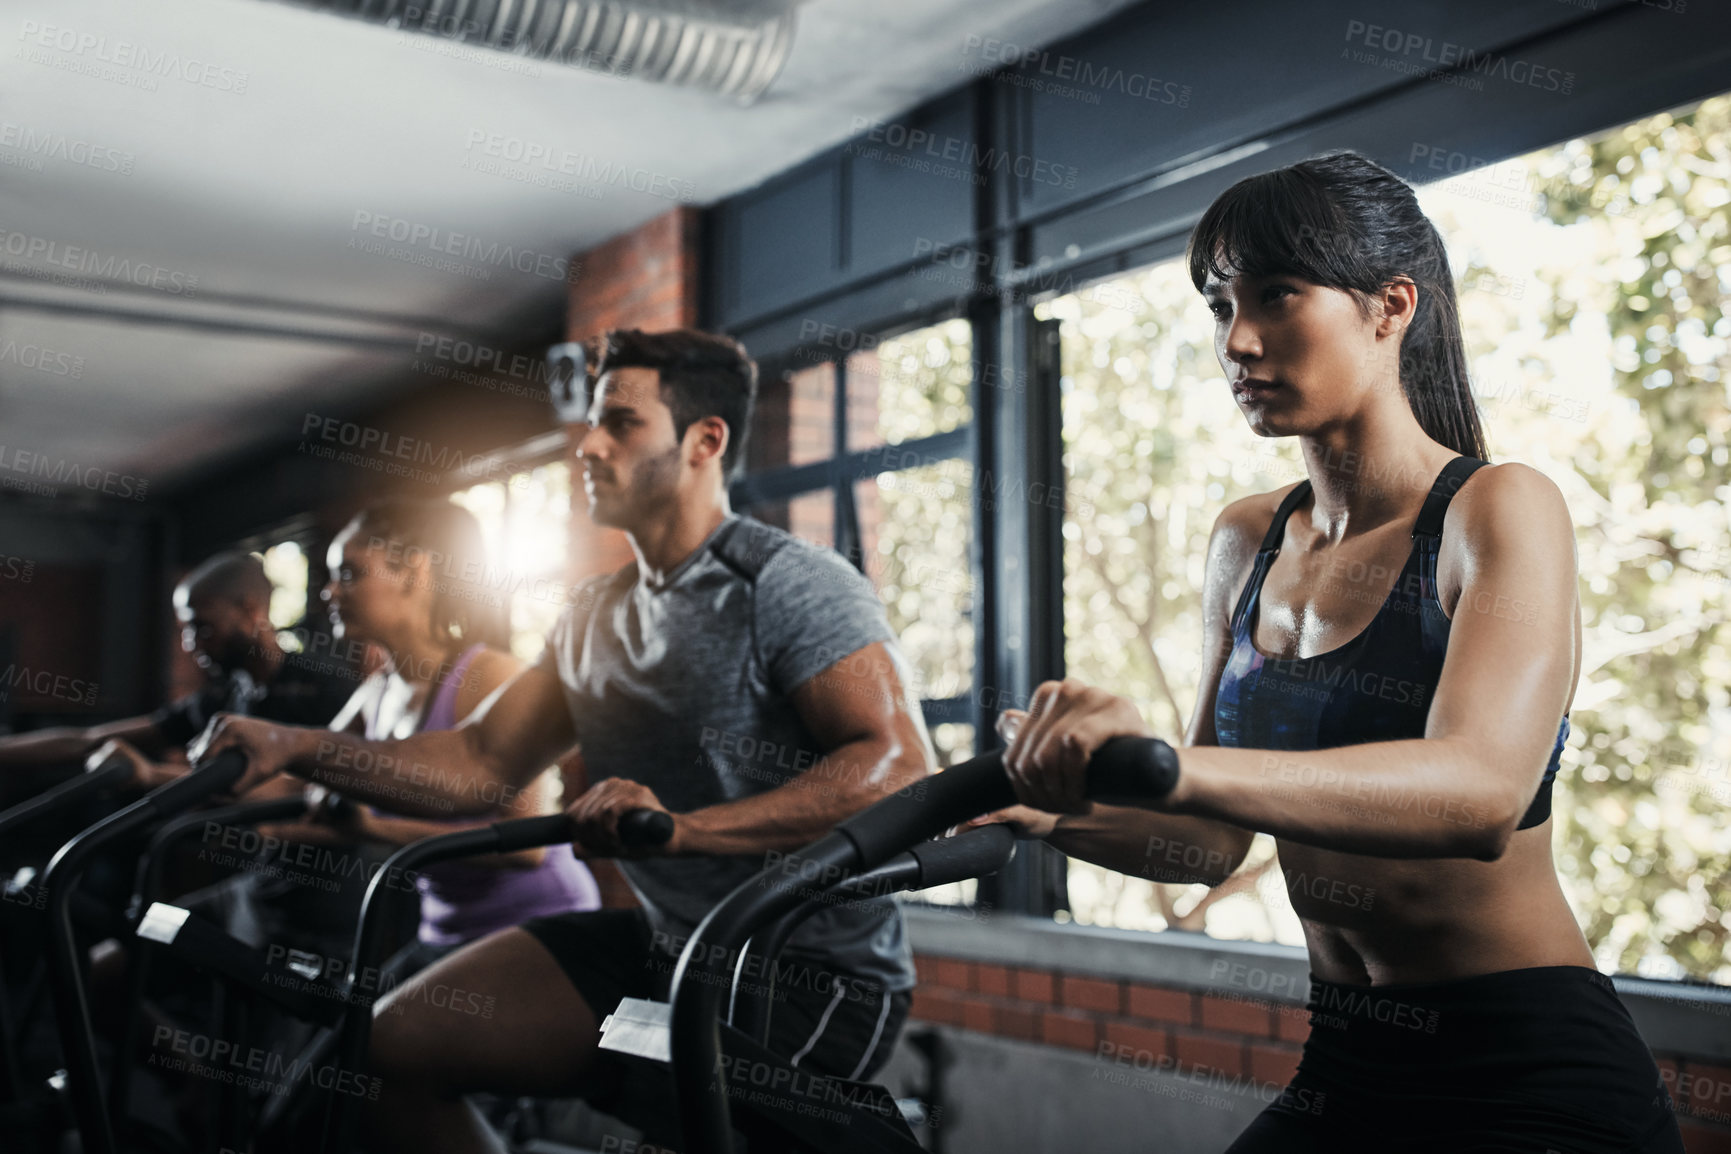 Buy stock photo Shot of young people working out in the gym